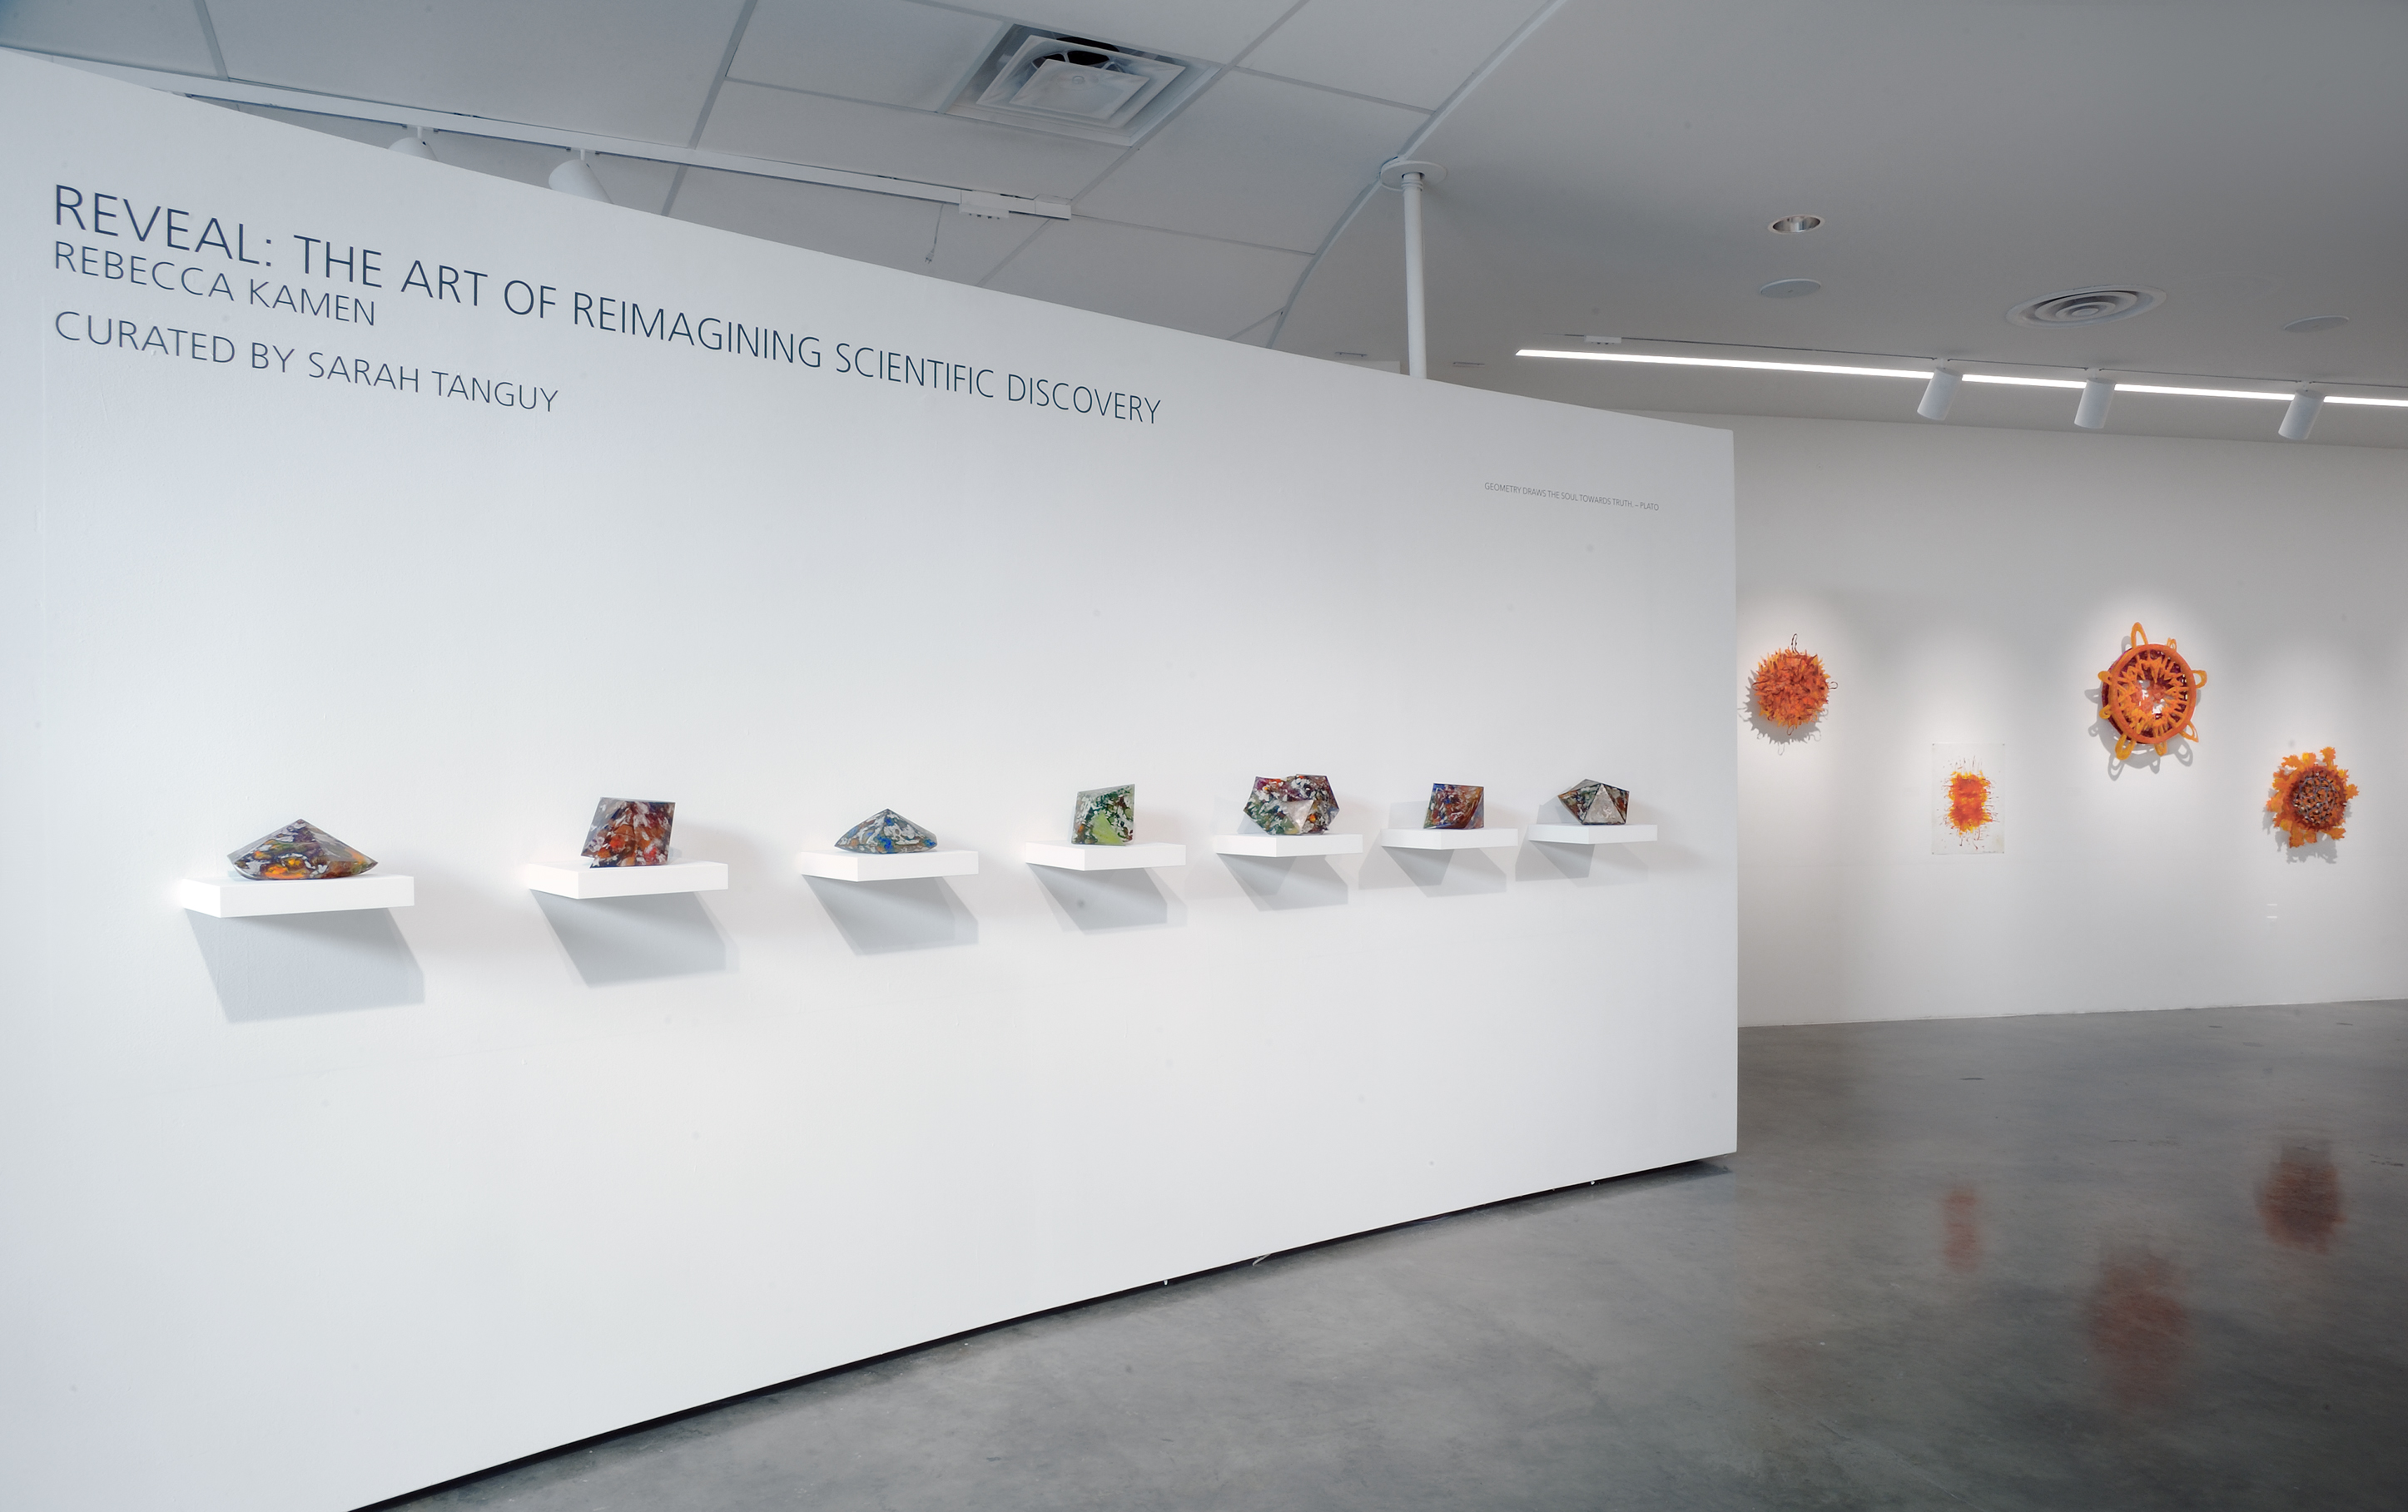 the entrance to an art exhibit called Reveal the art of reimagining scientific discovery, with white shelves of sculptures and wall displays in the background